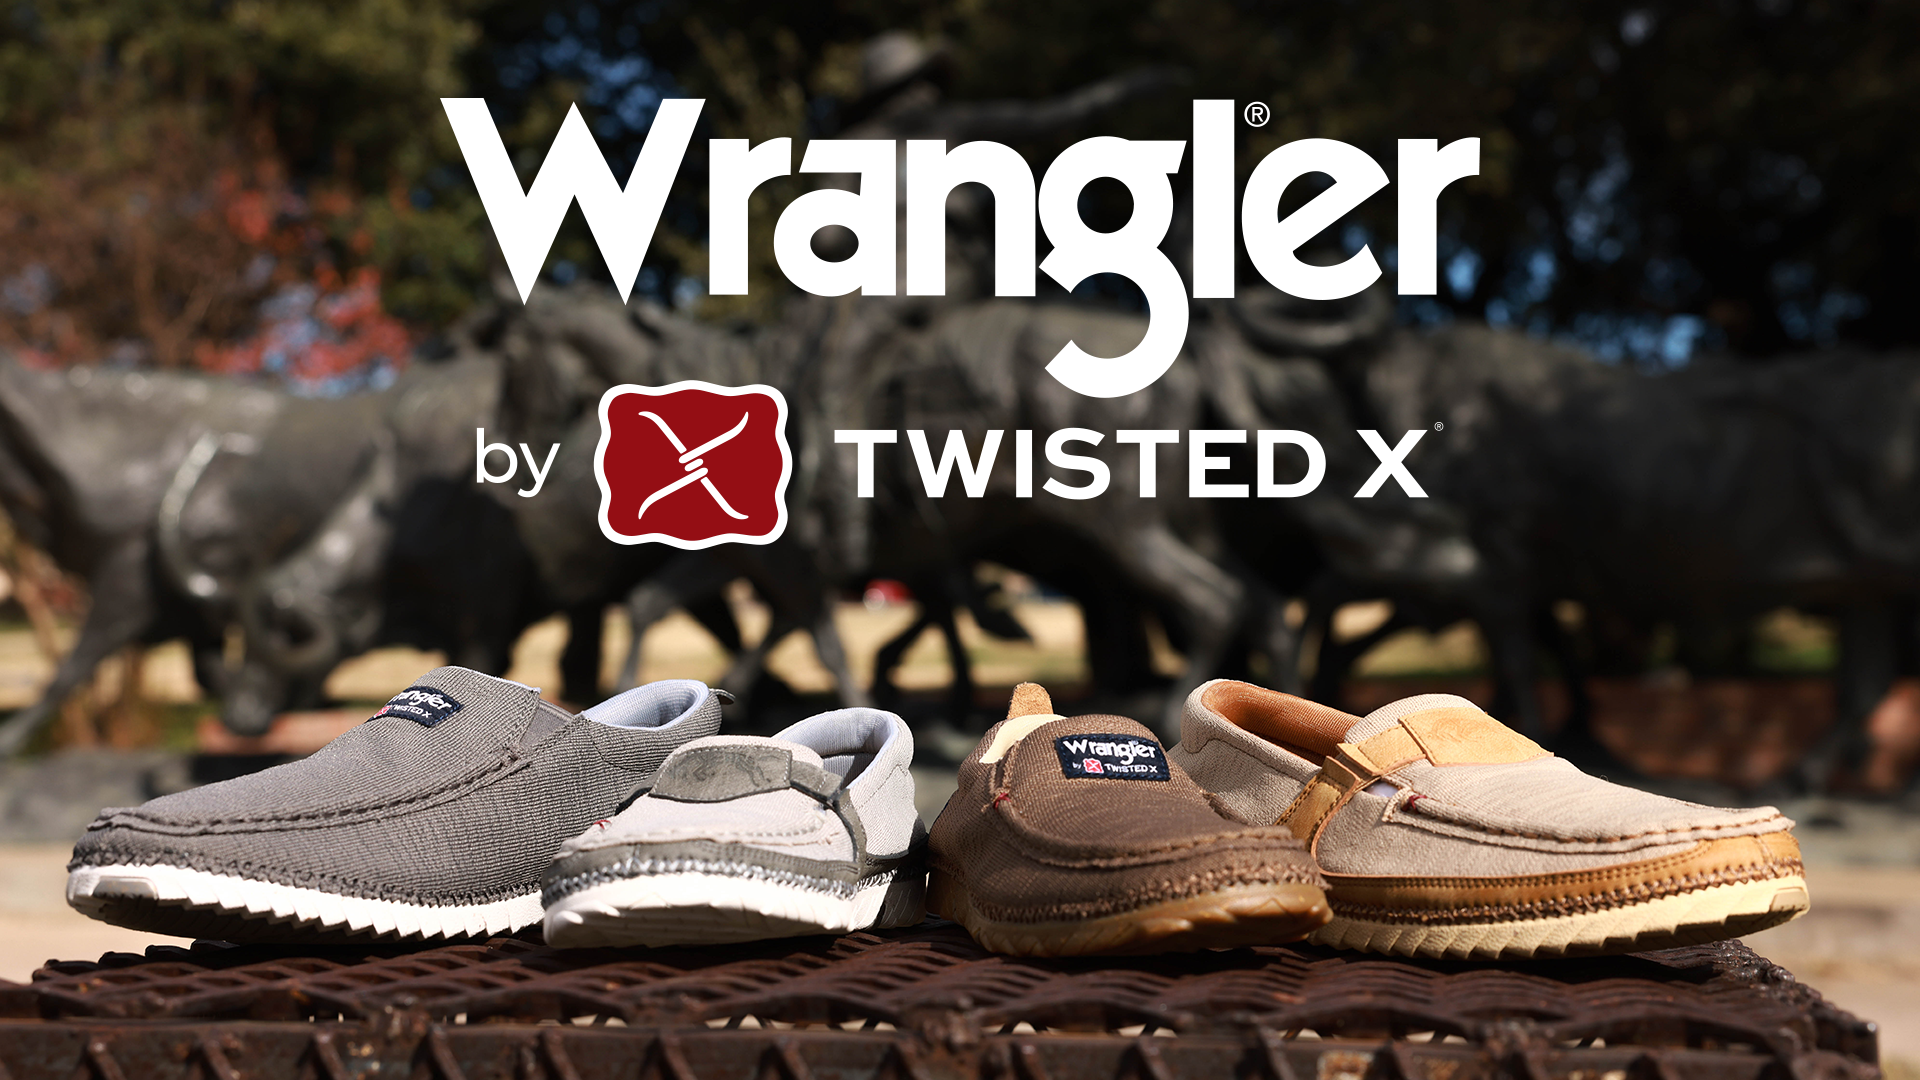 Shoes on a bench with Wrangler by Twisted X in text above